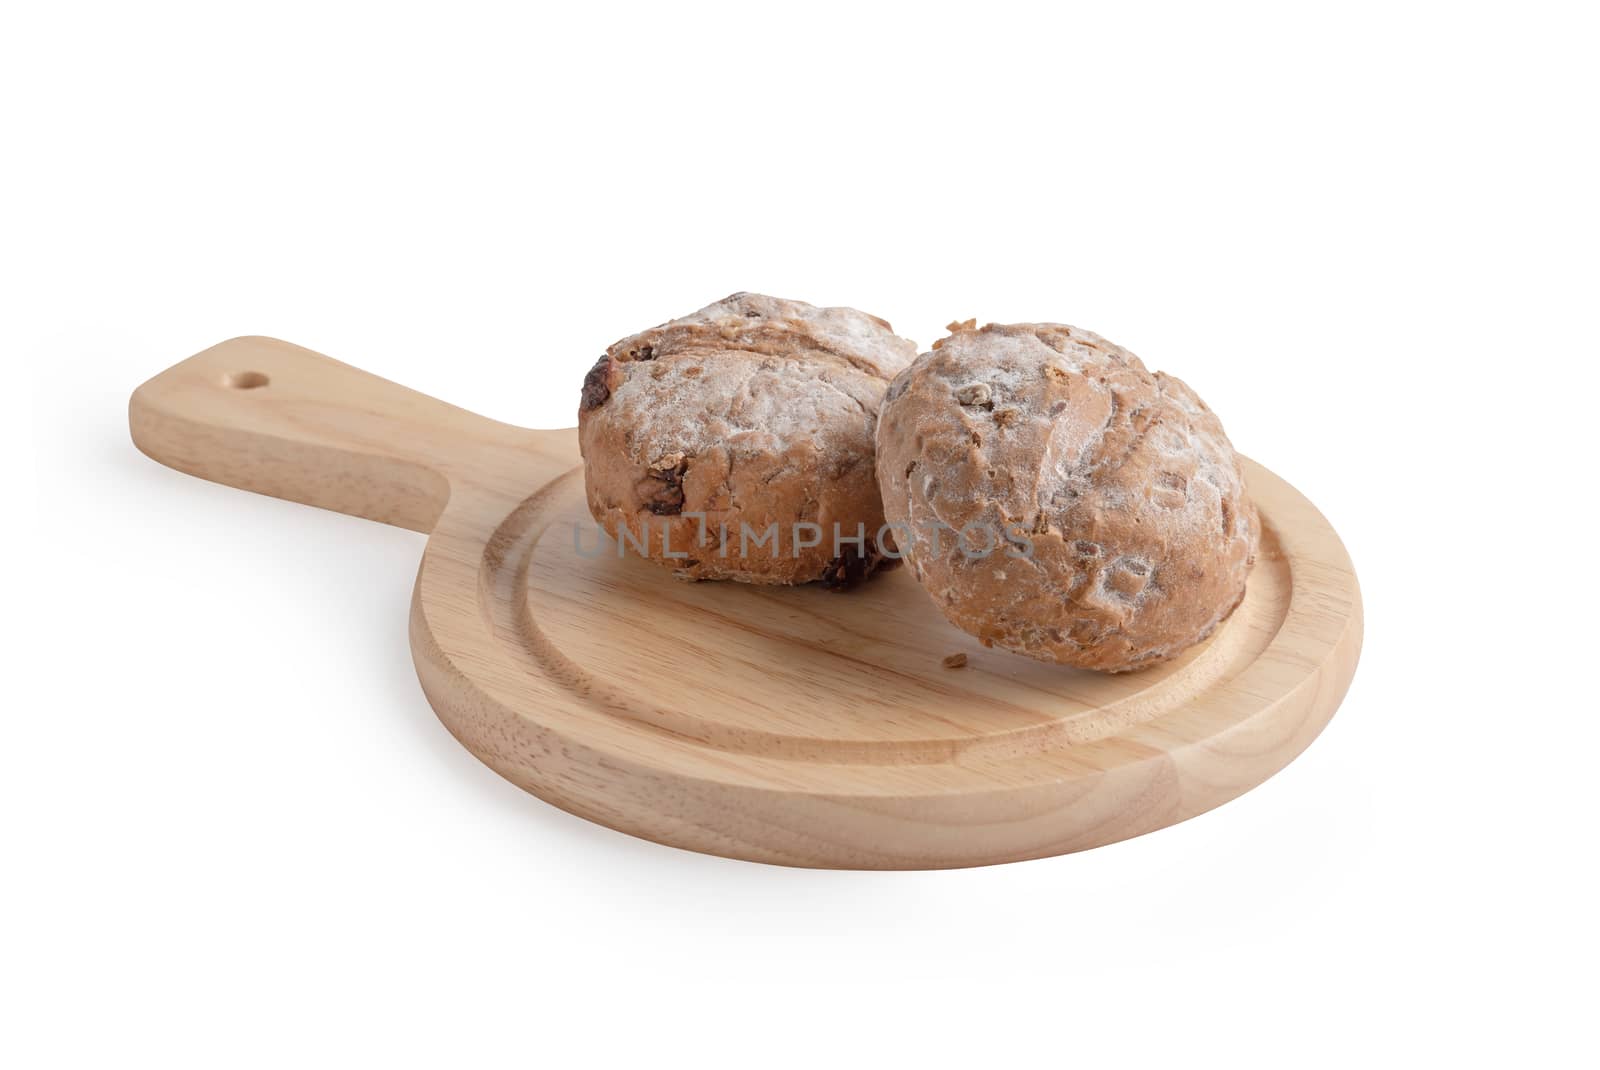 Homemade buns on the cutting board isolated on the white background with clipping paths. Bread is a food made from wheat flour mixed with water and yeast or baking powder. Other ingredients are also used to enhance the color, flavor and aroma. Varies according to each type of bread.